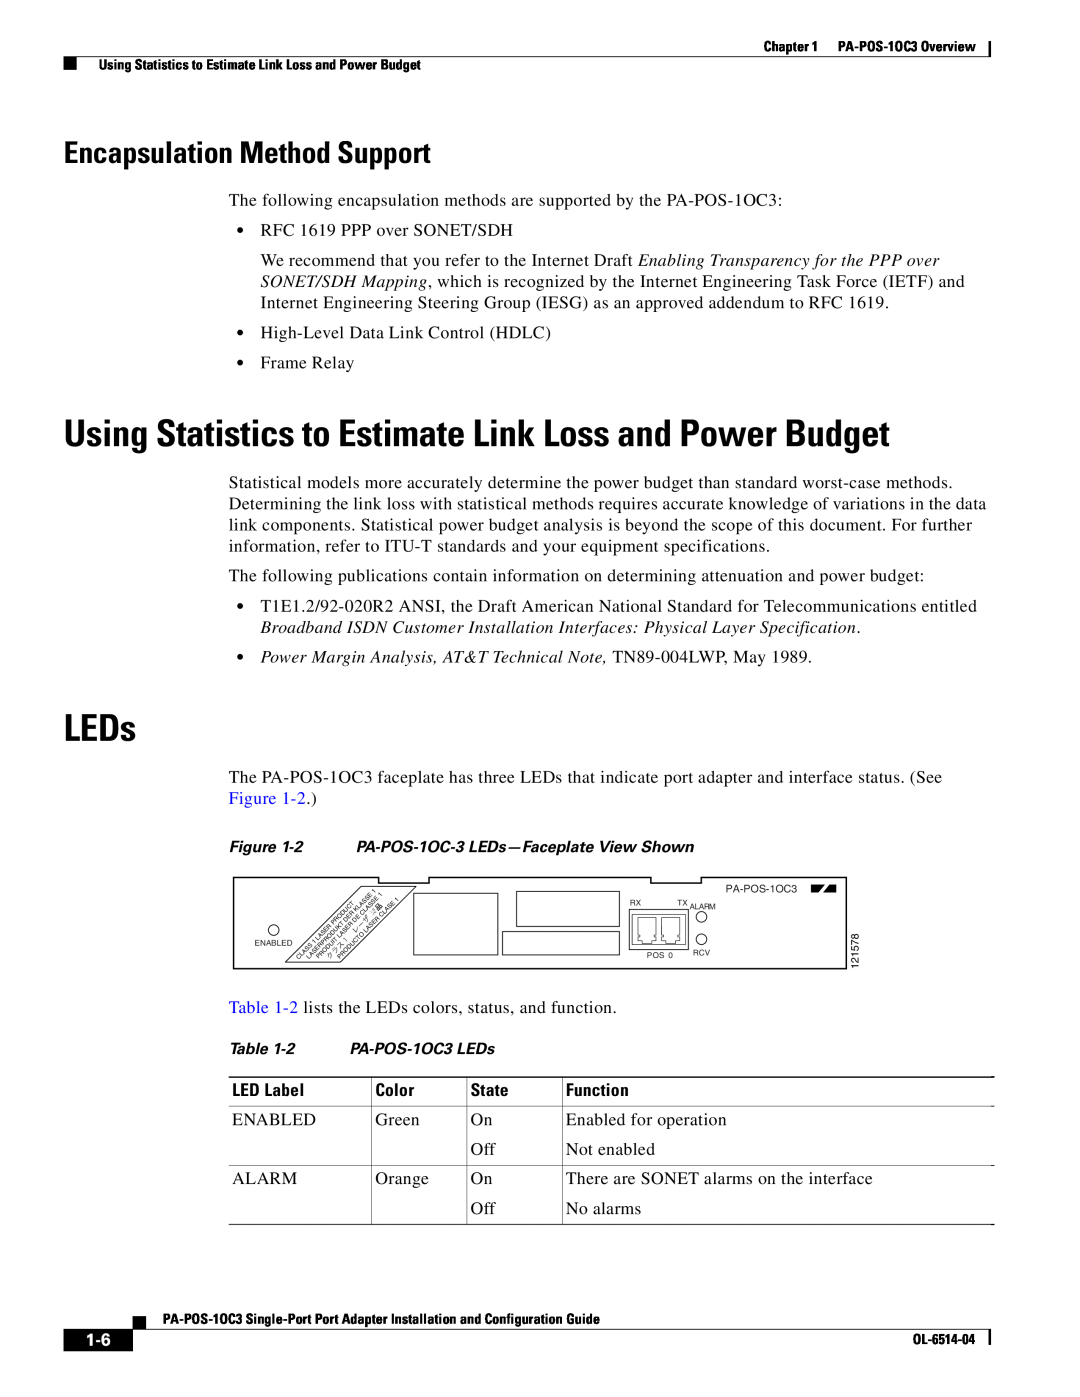 Cisco Systems PA-POS-2OC3 Using Statistics to Estimate Link Loss and Power Budget, LEDs, Encapsulation Method Support 